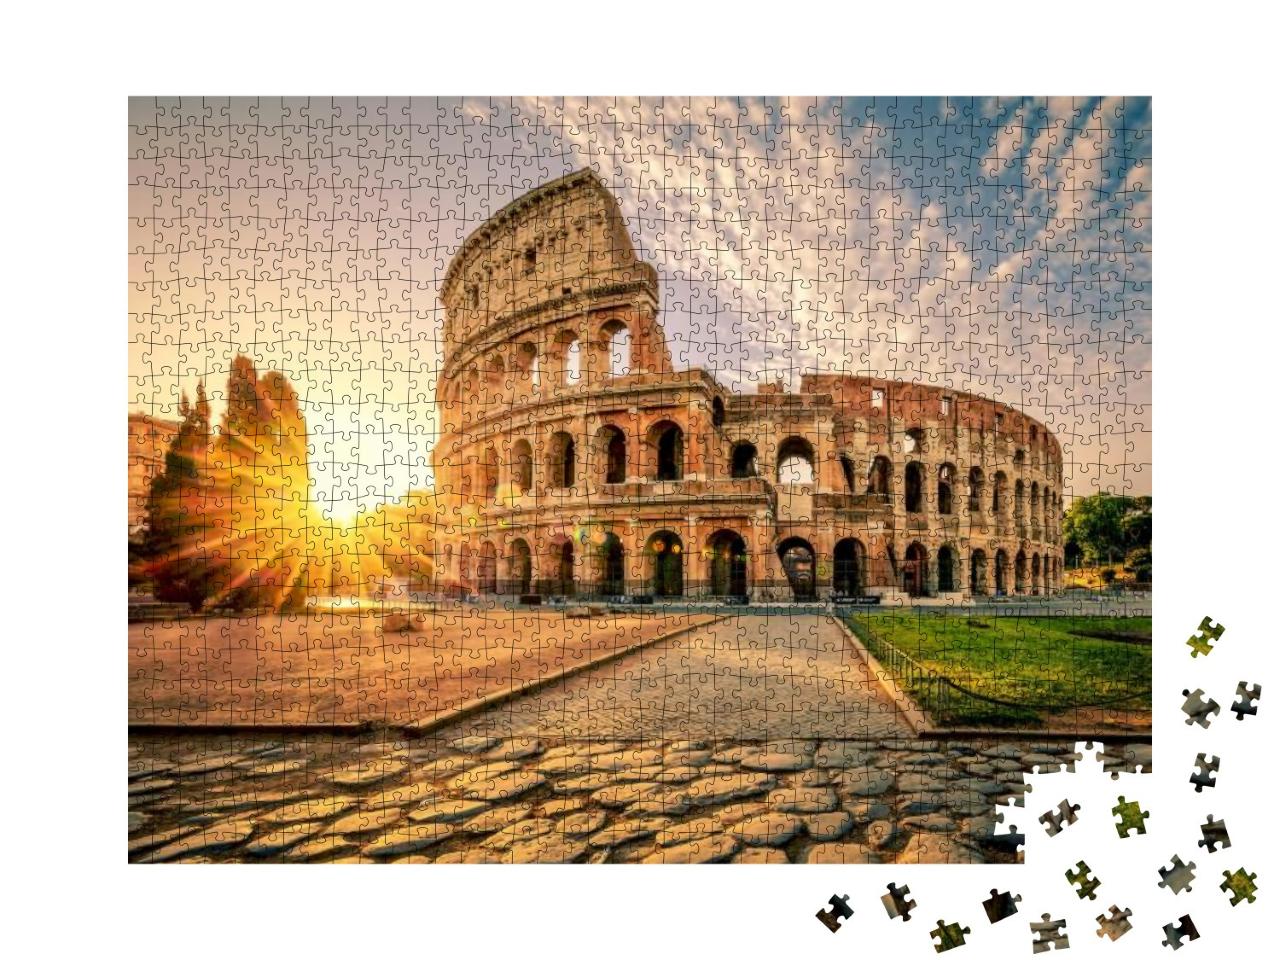 Colosseum in Rome At Sunrise, Italy, Europe... Jigsaw Puzzle with 1000 pieces